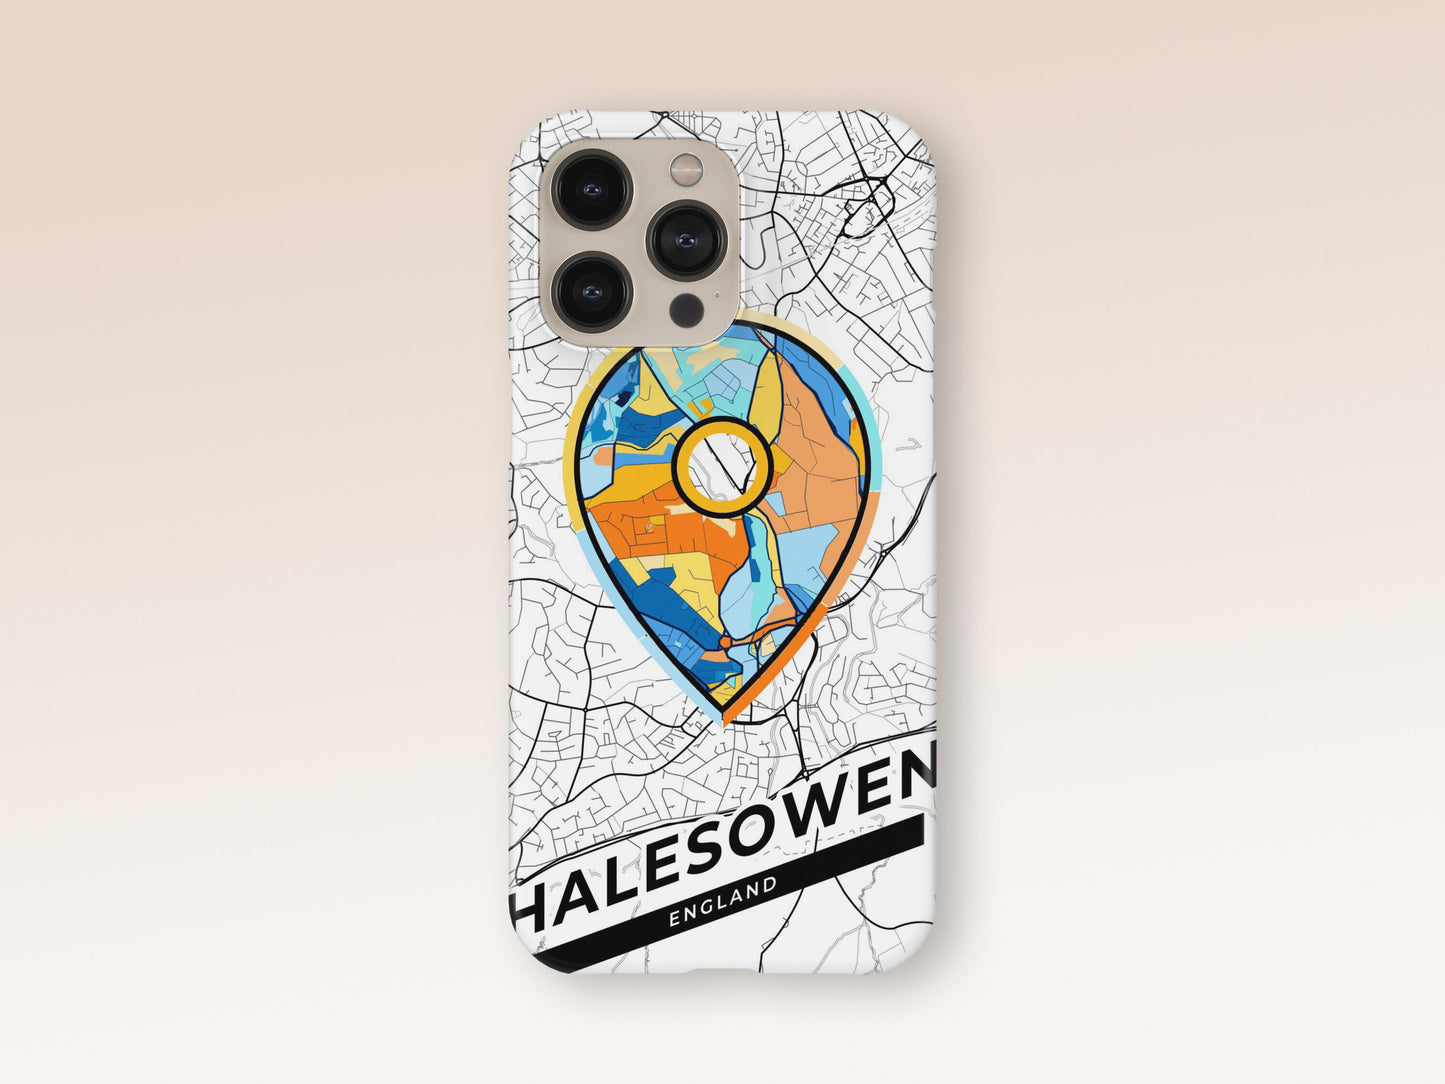 Halesowen England slim phone case with colorful icon. Birthday, wedding or housewarming gift. Couple match cases. 1